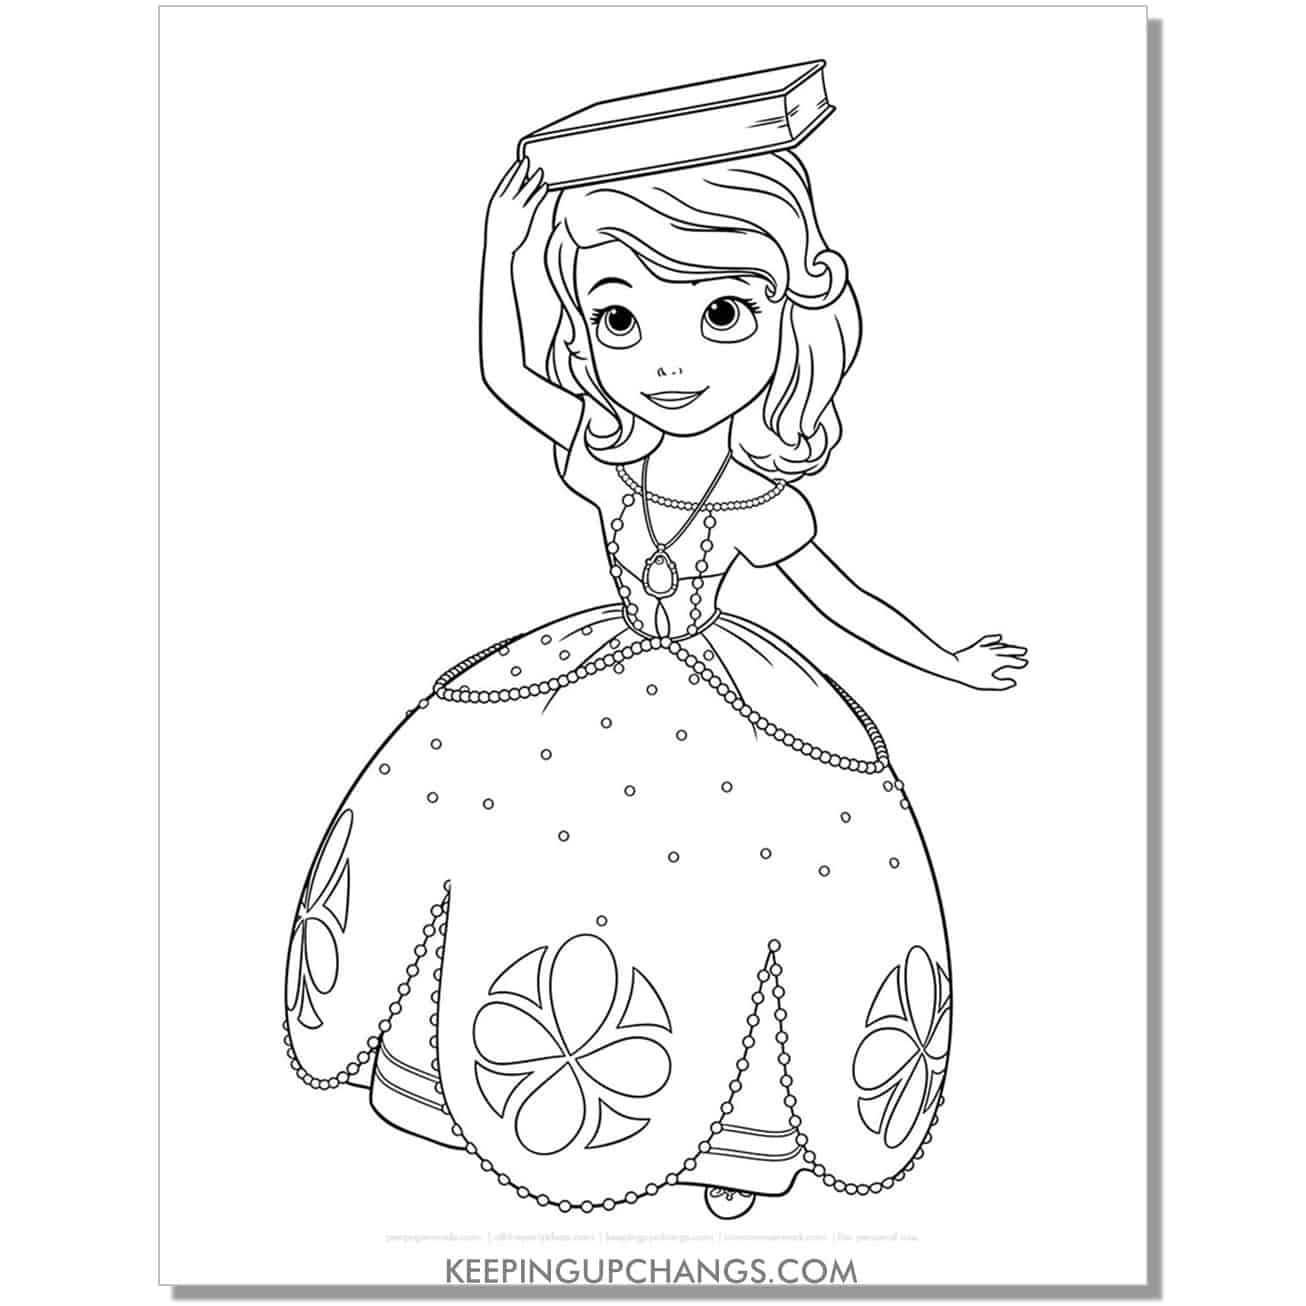 sofia the first balancing book on head coloring page, sheet.